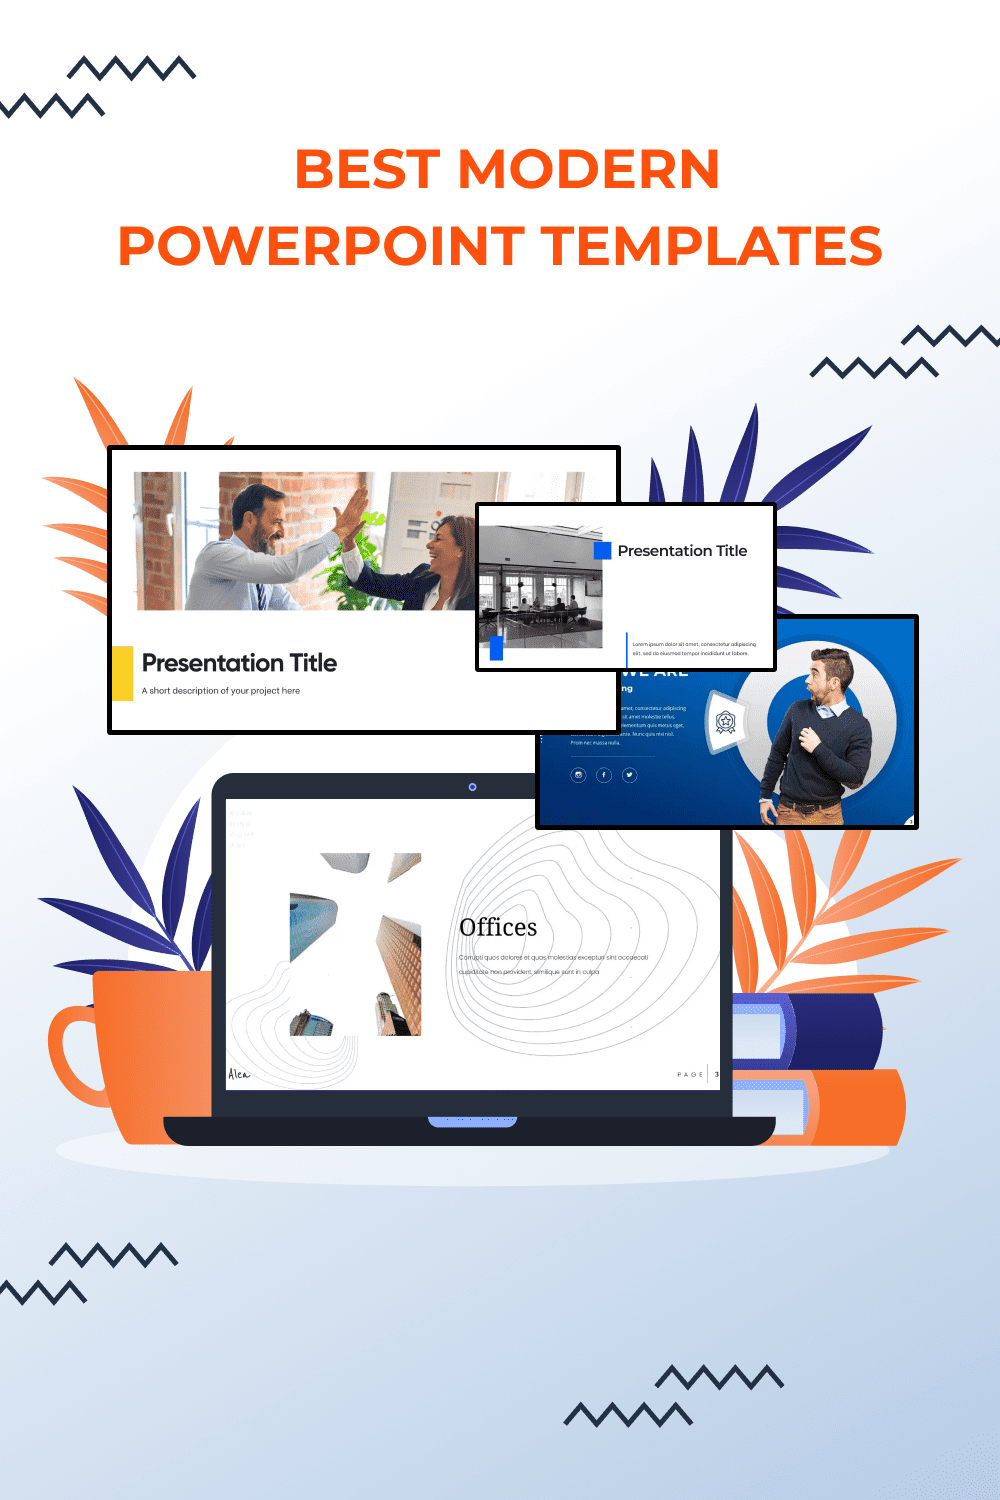 title 90 modern powerpoint templates for 2022 free and paid pinterest.